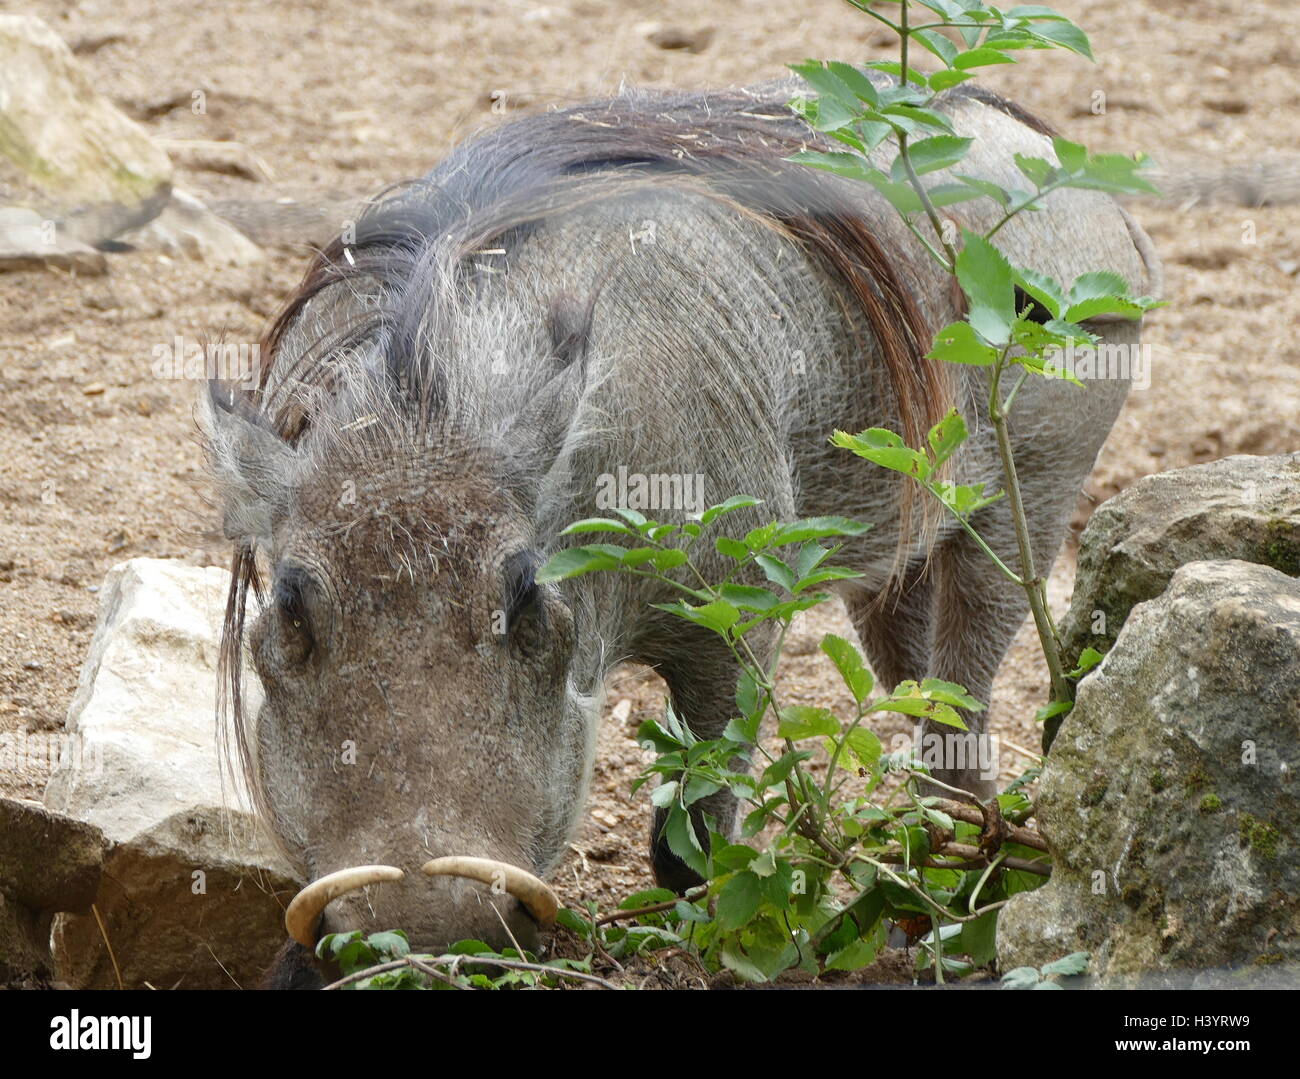 Phacochoerus is a genus of wild pigs in the family Suidae, known as warthogs. It is the sole genus of subfamily Phacochoerinae. They are found in open and semiopen habitats, even in quite arid regions, in sub-Saharan Africa. Stock Photo